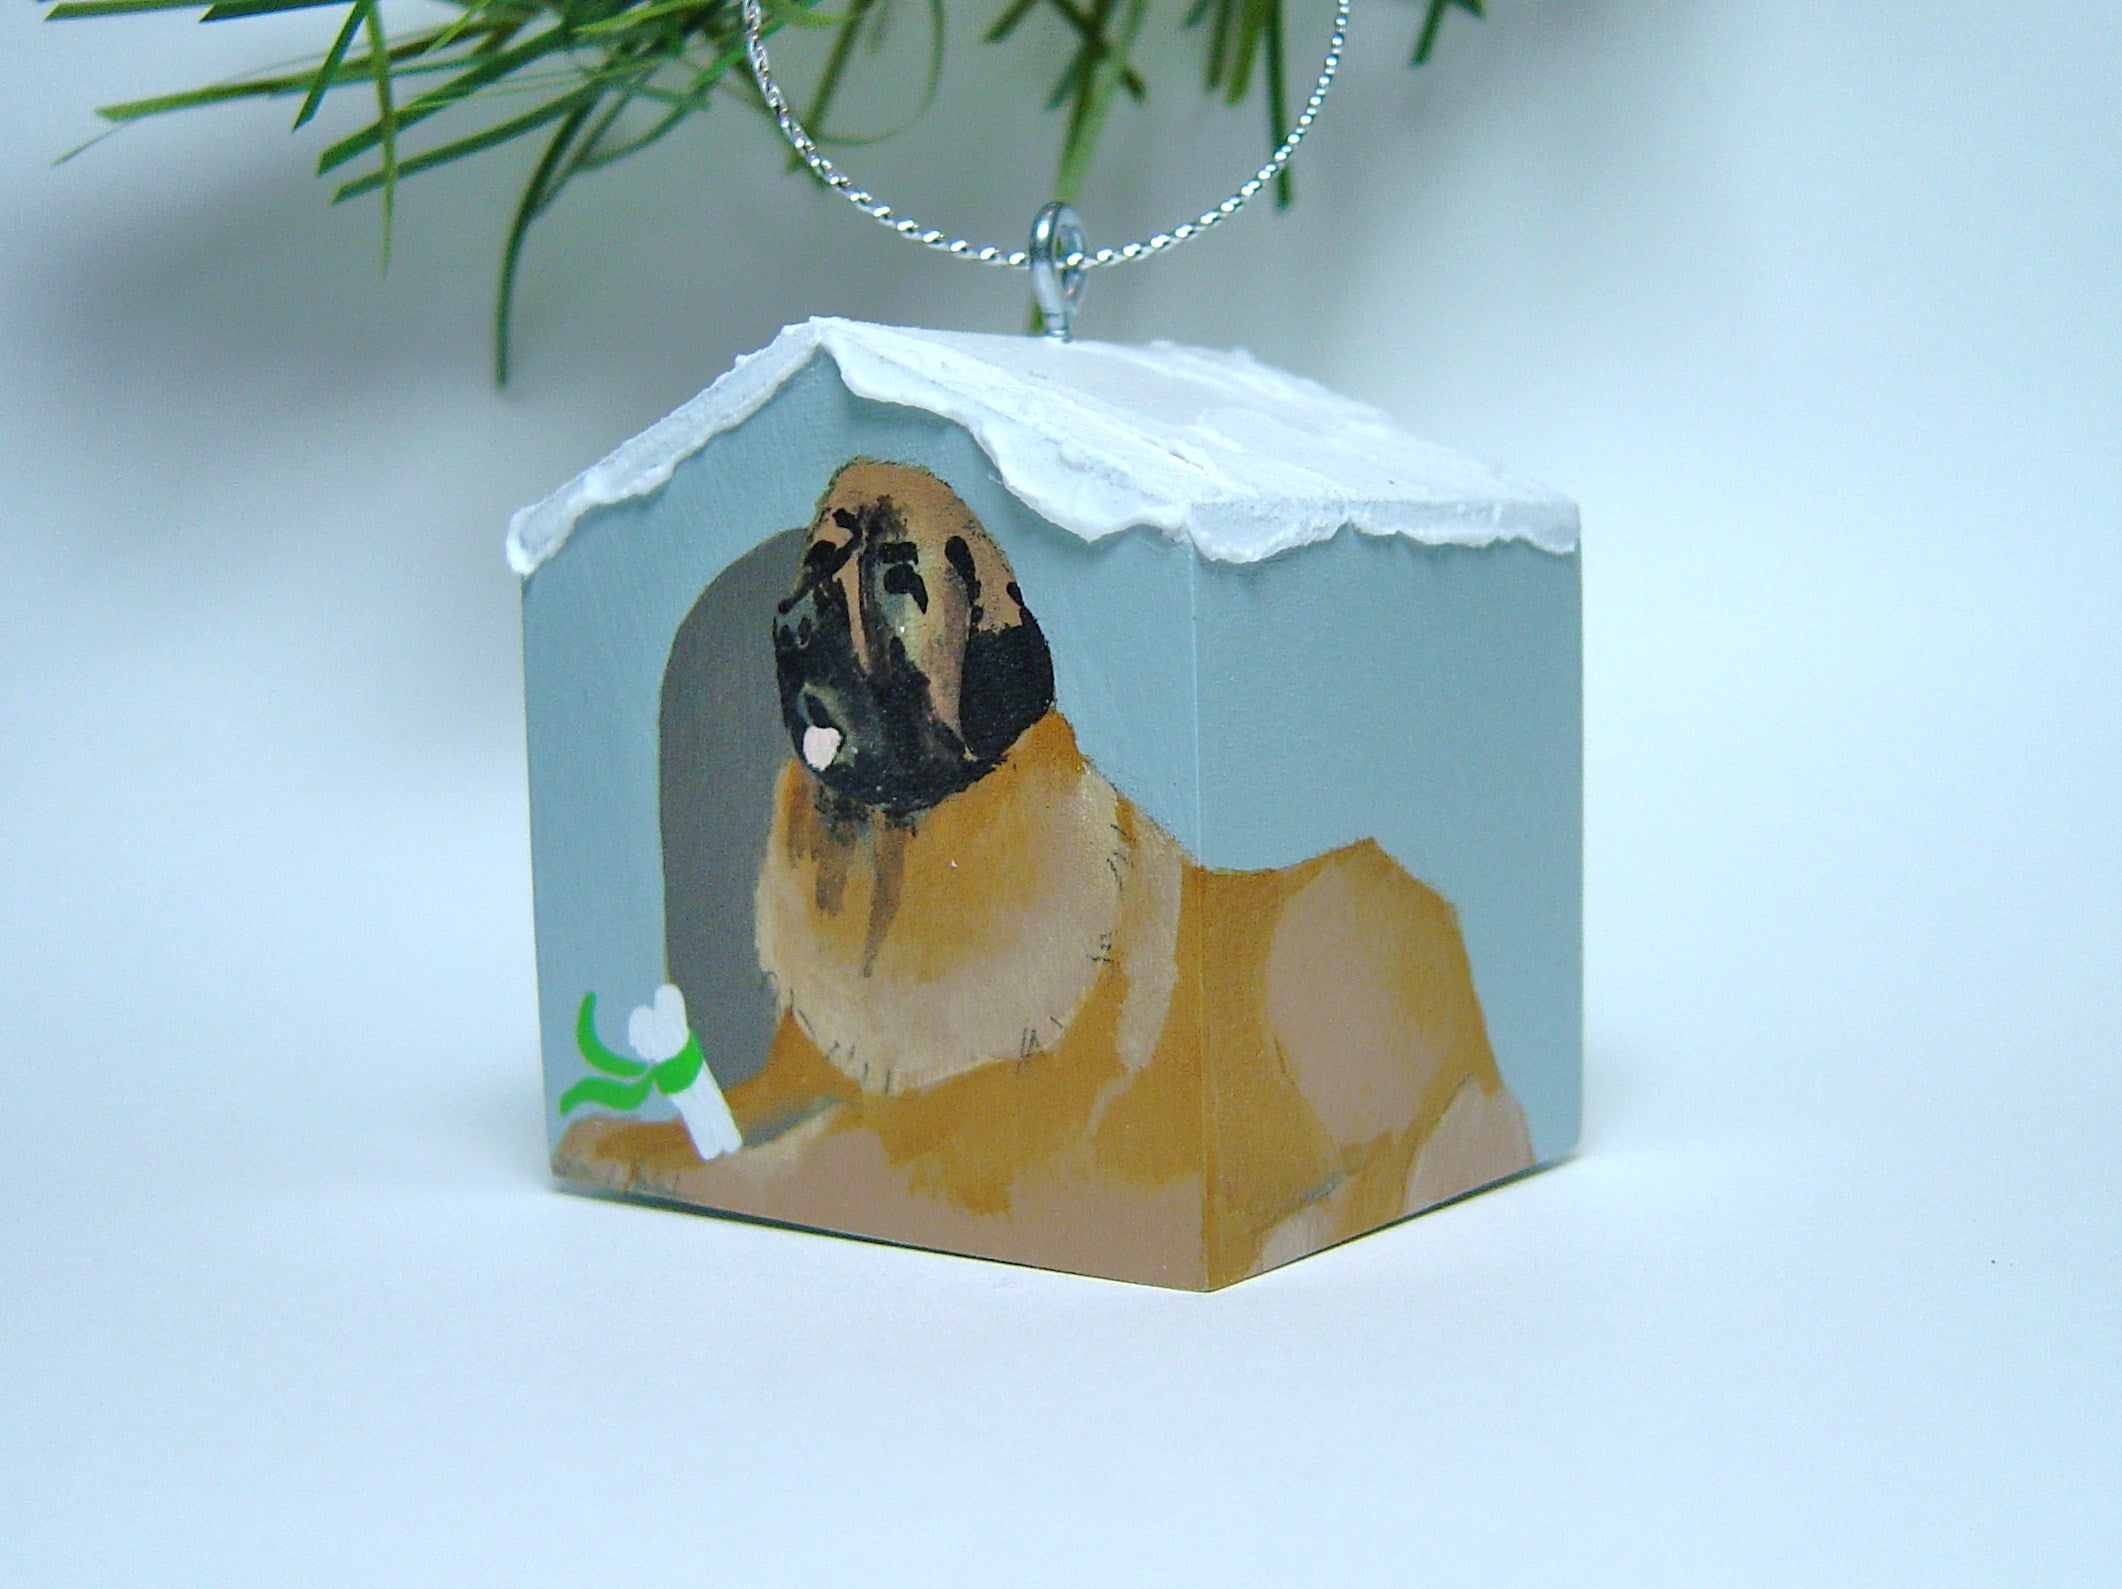 "Hand painted doghouse ornament - Leo"